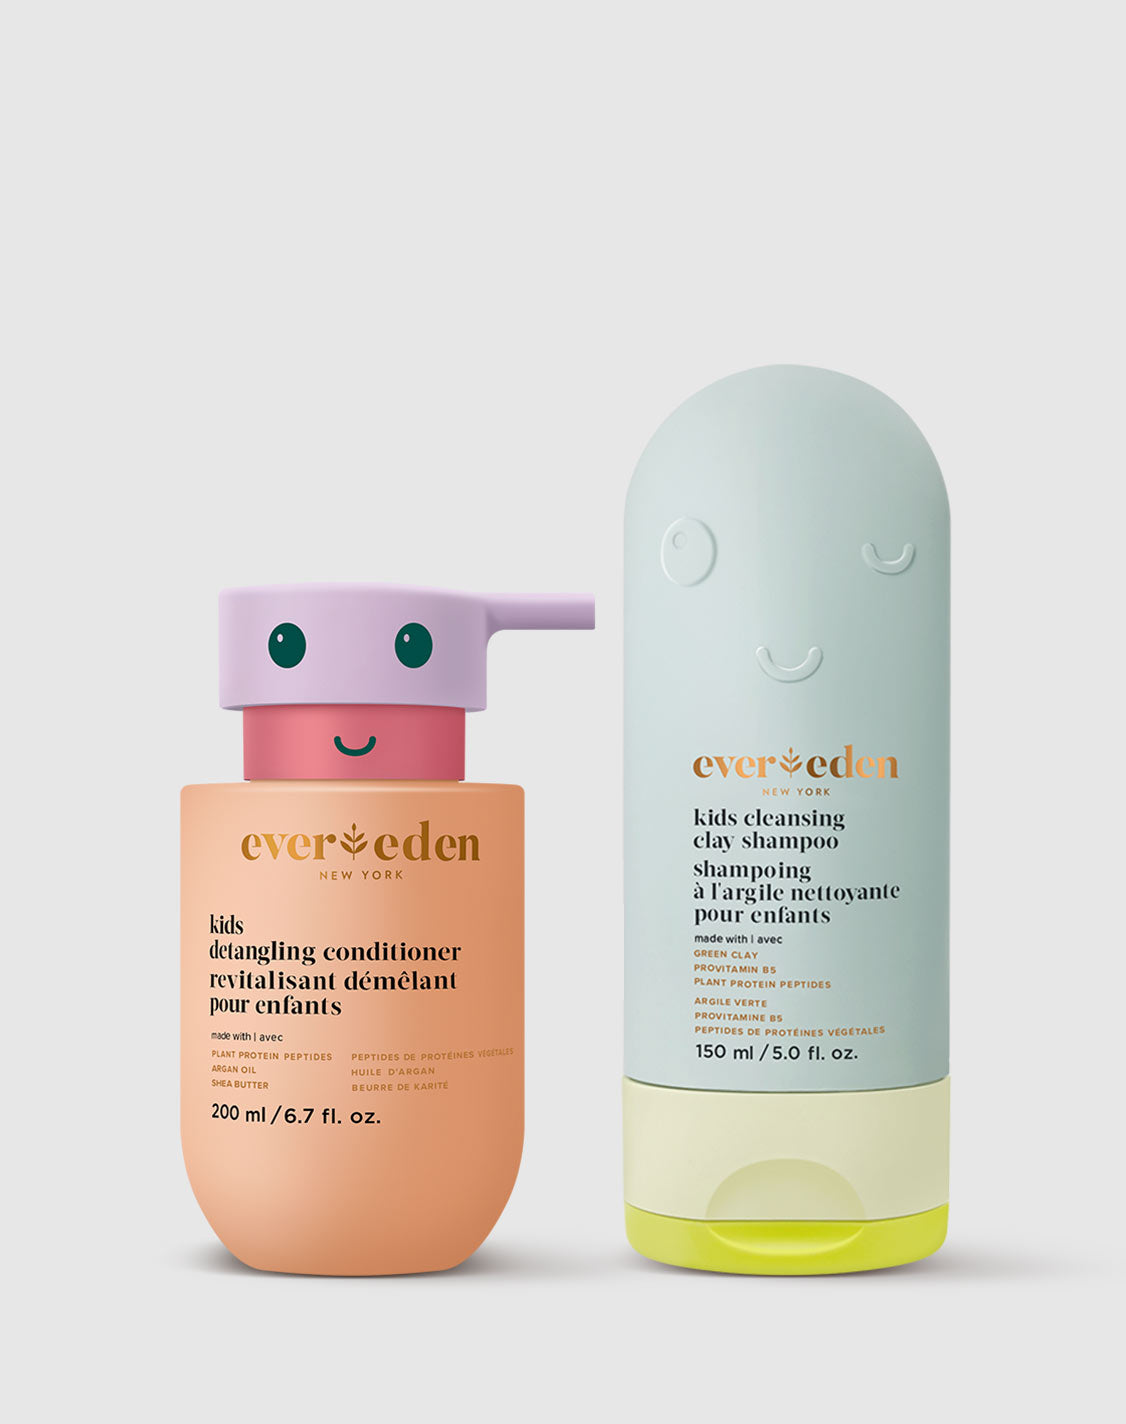 Evereden Kids Shampoo and Conditioner 2 in 1 Melon Juice, 10.1 fl oz. Plant Based and Natural Kids Skin Care Non-Toxic and Organic Ingredients